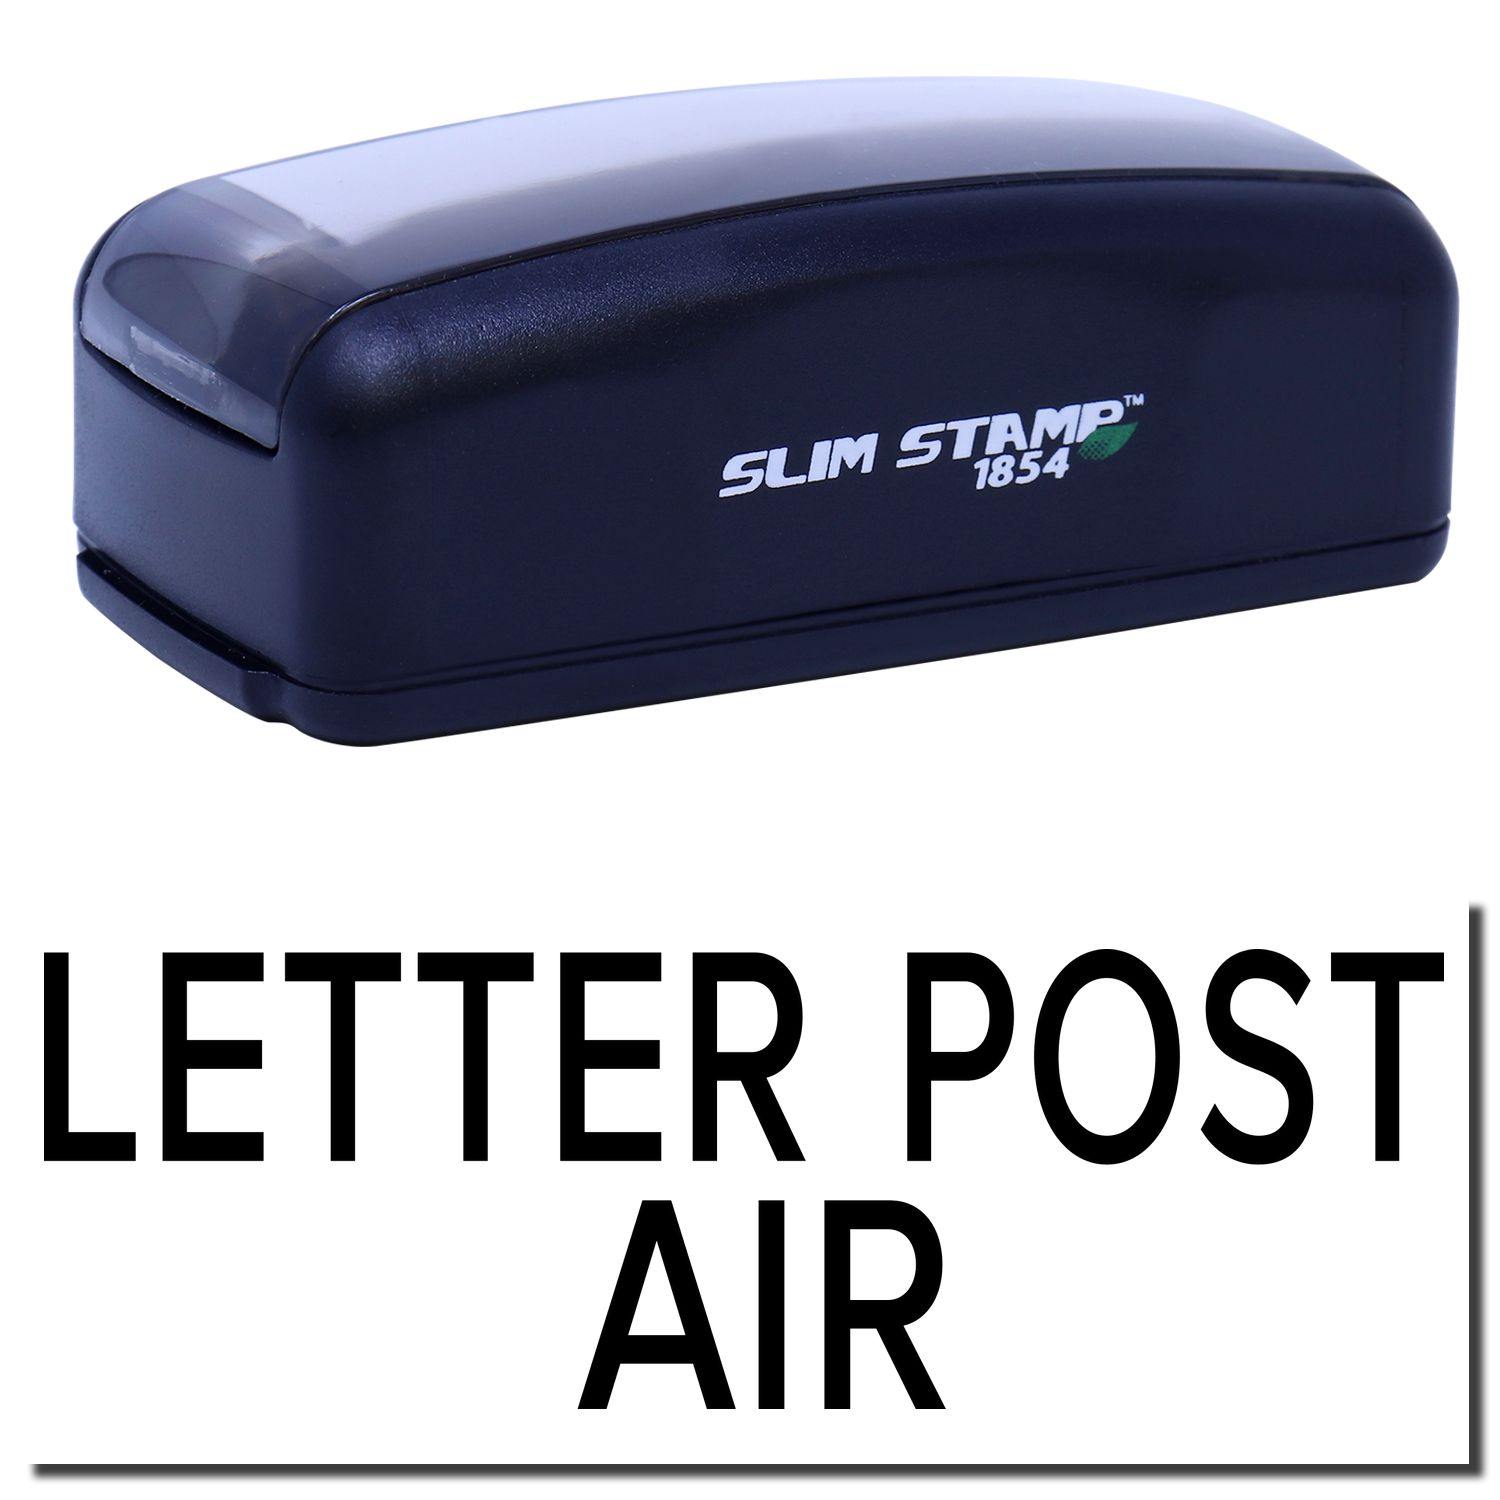 Large Pre-Inked Letter Post Air Stamp Main Image